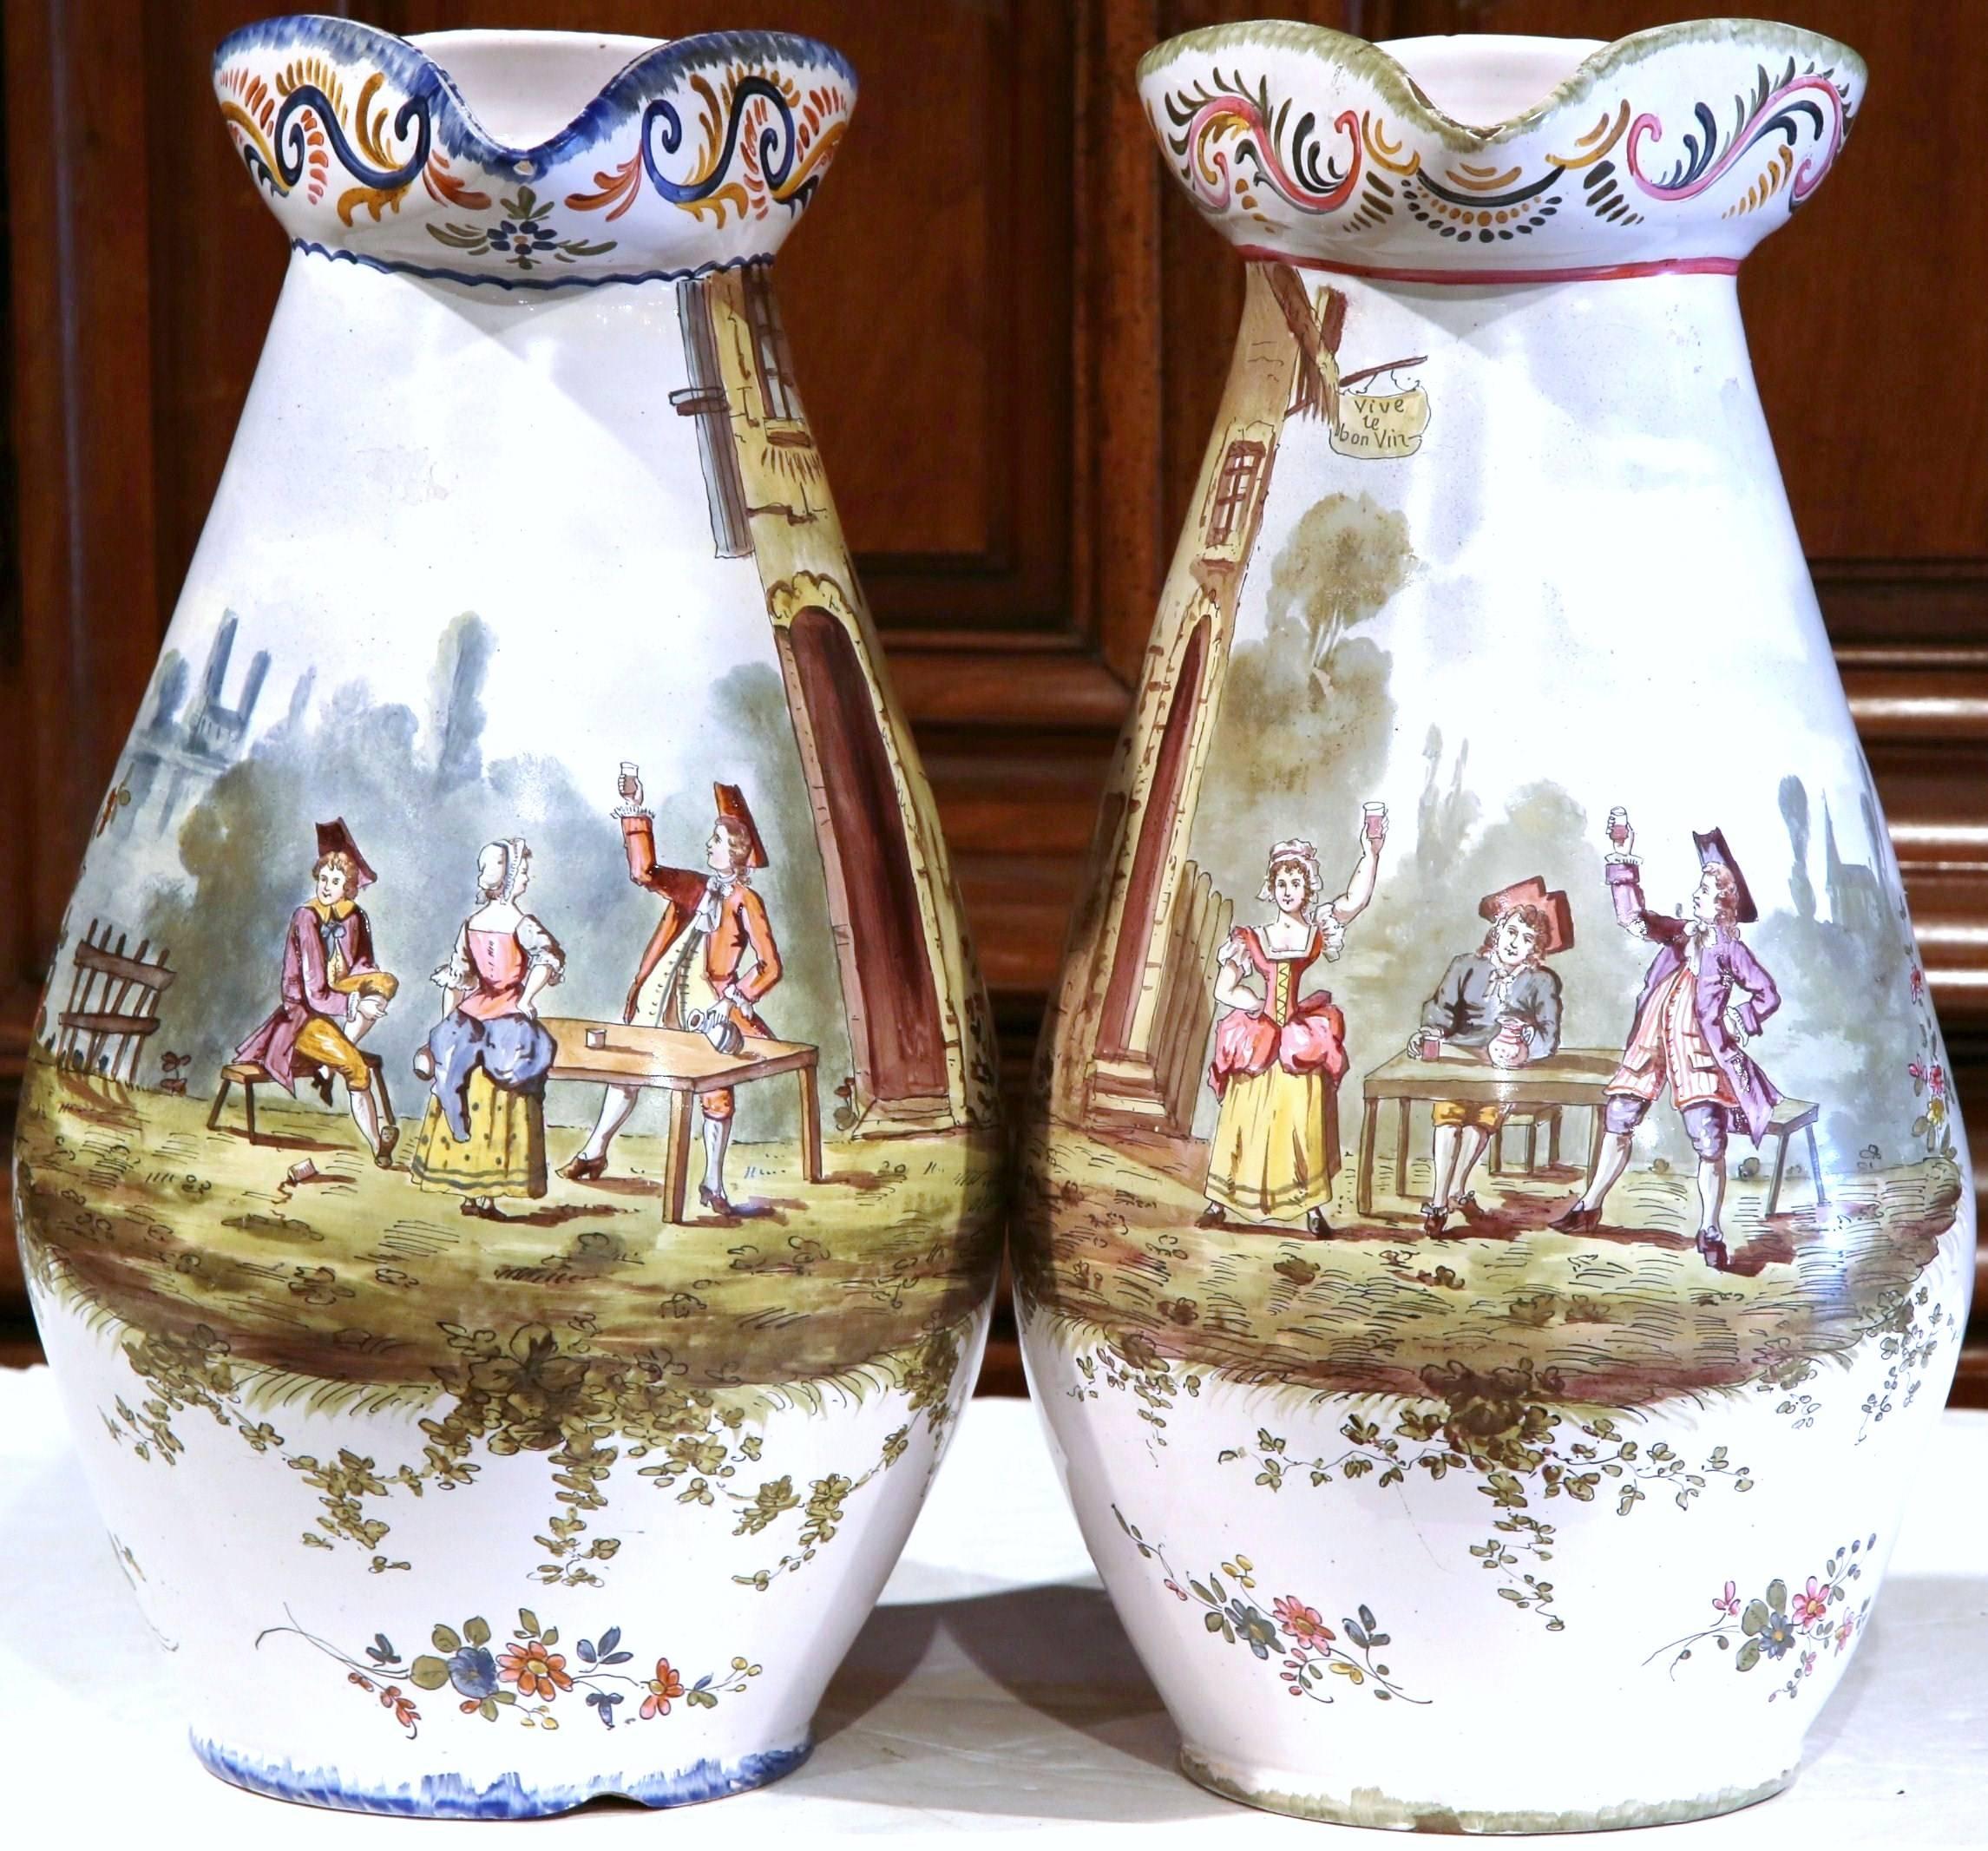 This tall pair of antique, porcelain pitchers was created in Burgundy, France circa 1880. The rustic amphoras feature hand-painted tavern and pastoral scenes with people sitting around a table while drinking wine and toasting to each other. One